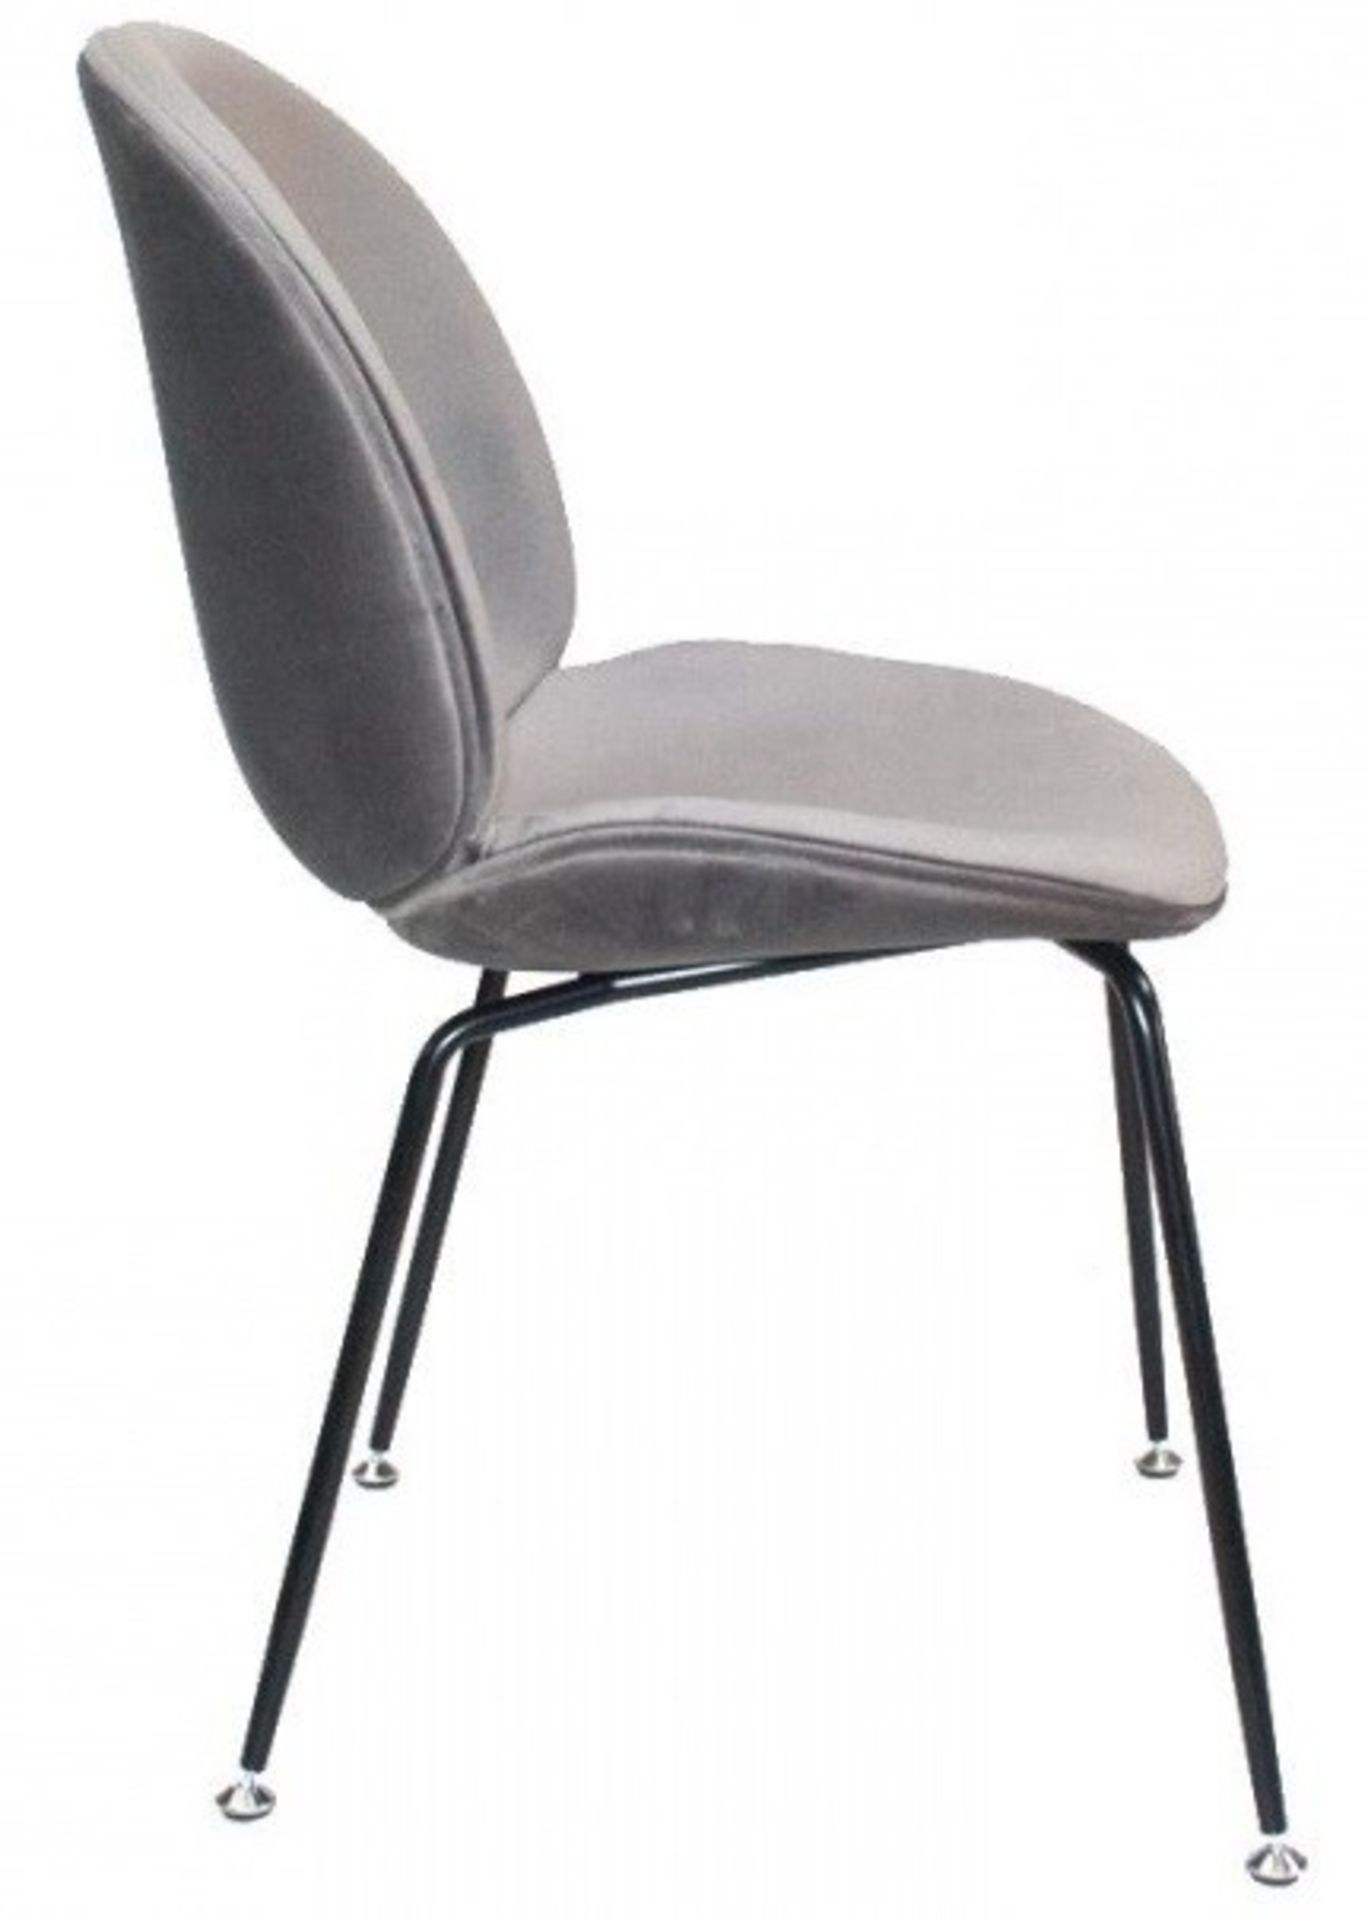 4 x GRACE Upholstered Contemporary Dining Chairs In Grey Velvet - Dimensions: W48 x D50 x H85 cm - Image 2 of 3